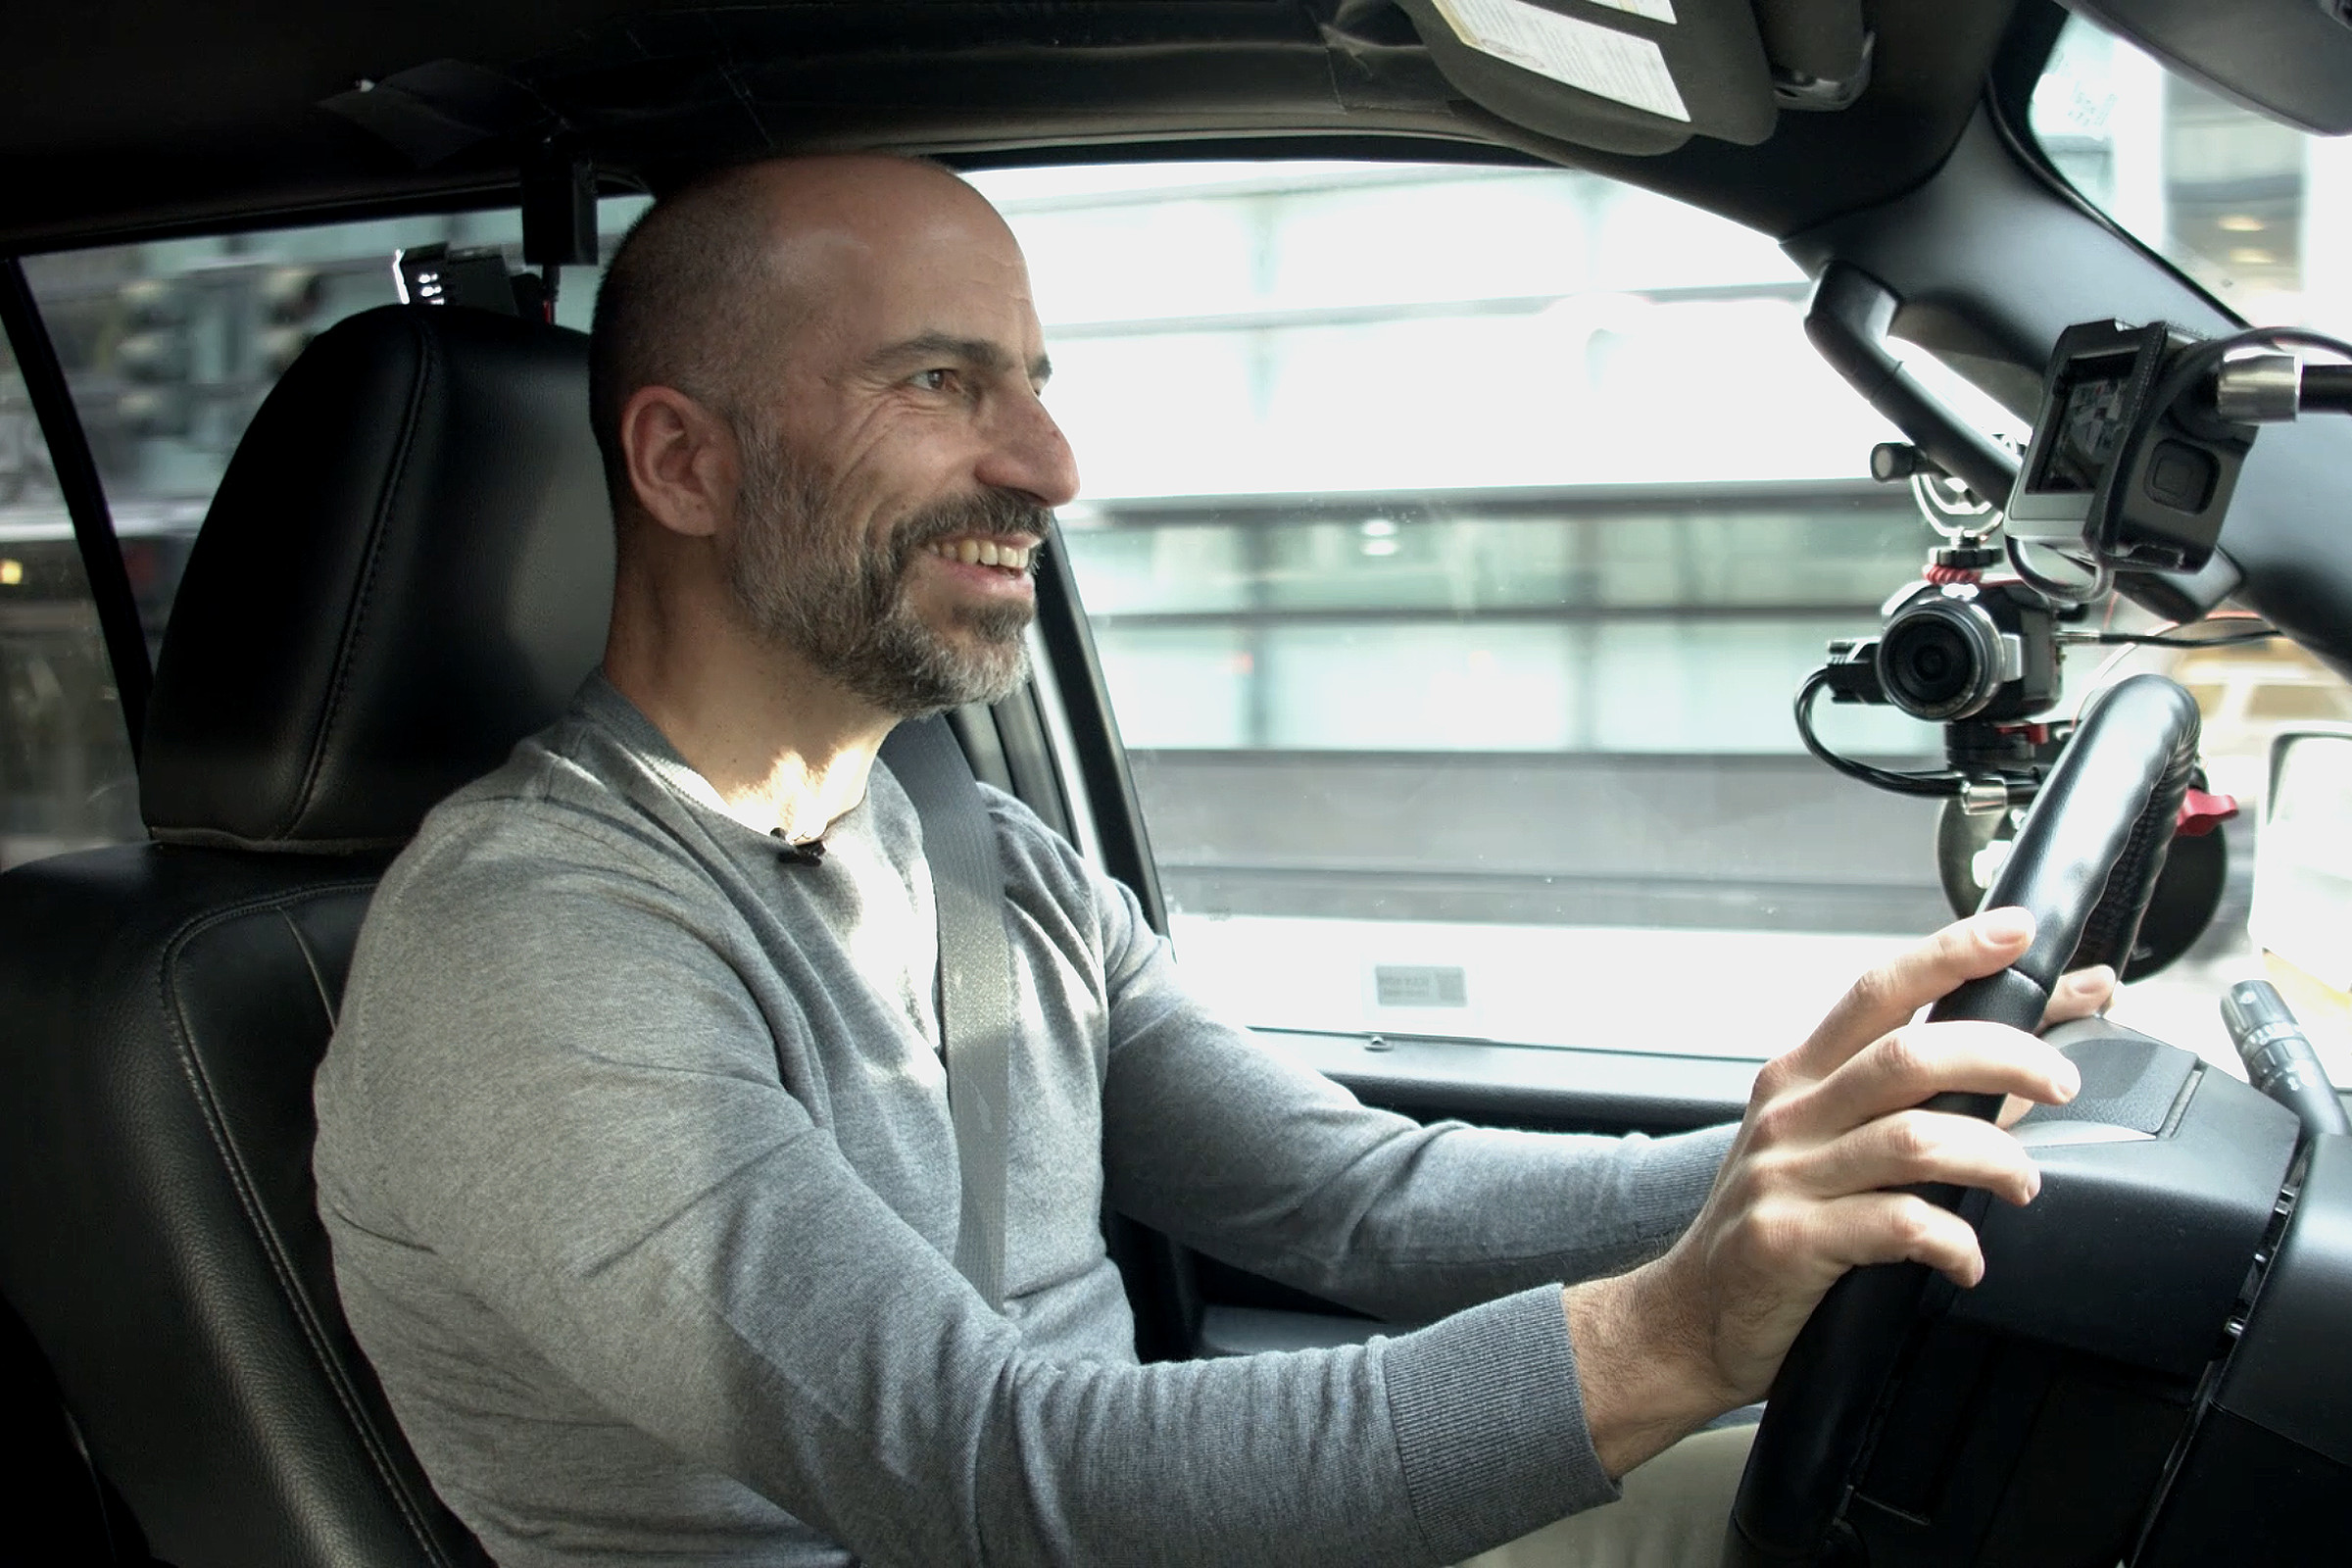 “How do you do, fellow drivers?” Uber CEO Dara Khosrowshahi personally tested out the new driver app before giving it the green light.